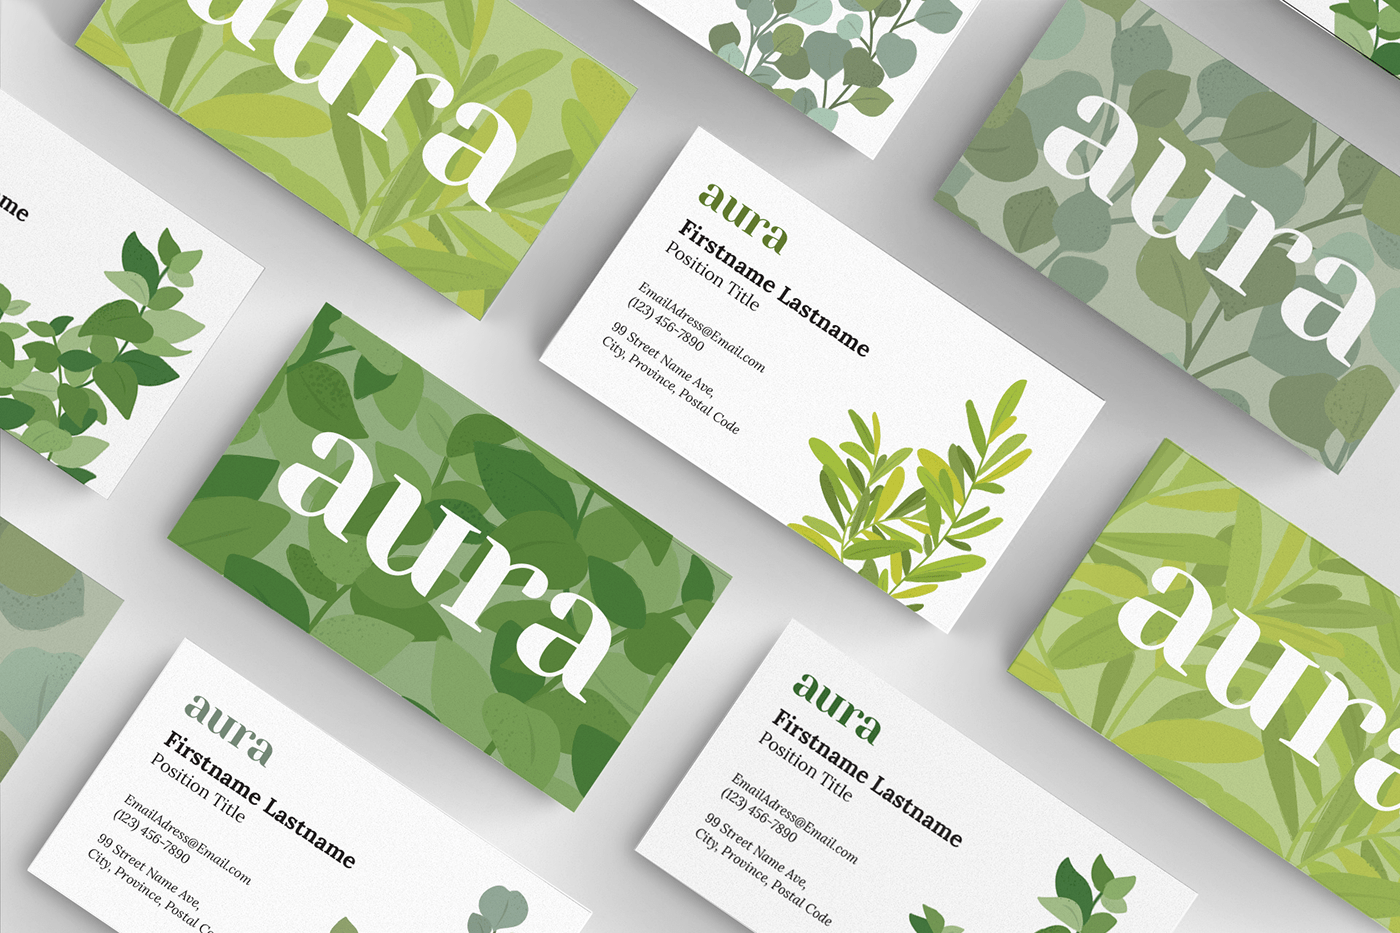 adobeawards branding  essential oils graphic design  natural package design  Packaging visual identity Aromatherapy essential oil